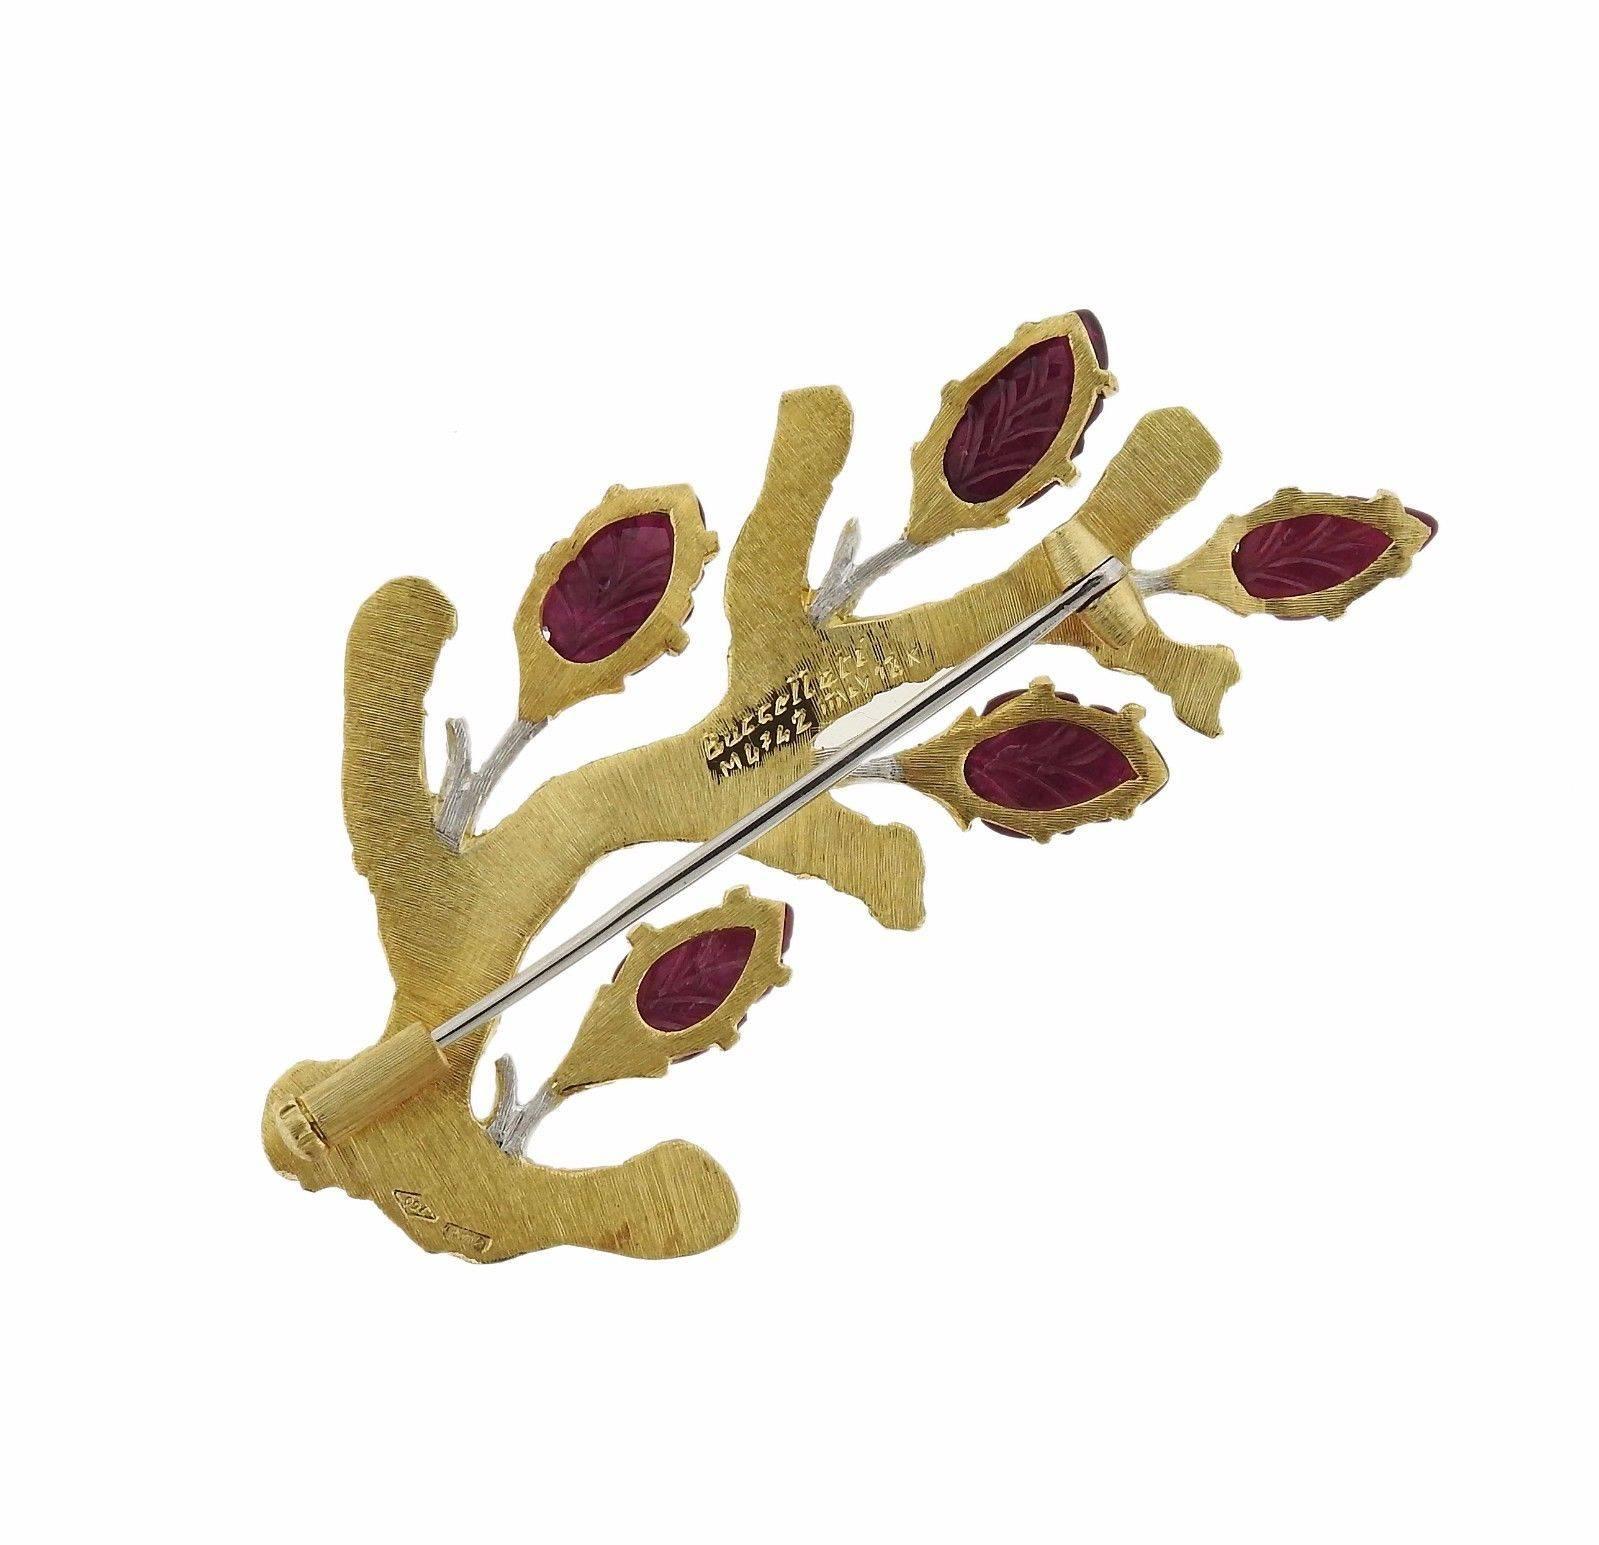 An 18k gold brooch pin set with 5.24ctw of carved rubies.  The brooch measures 54mm x 32mm and weighs 13.6 grams.  Marked: 750, ML742, Italy, 18k, Buccellati. Comes with Buccellati paperwork . Retail $18230.